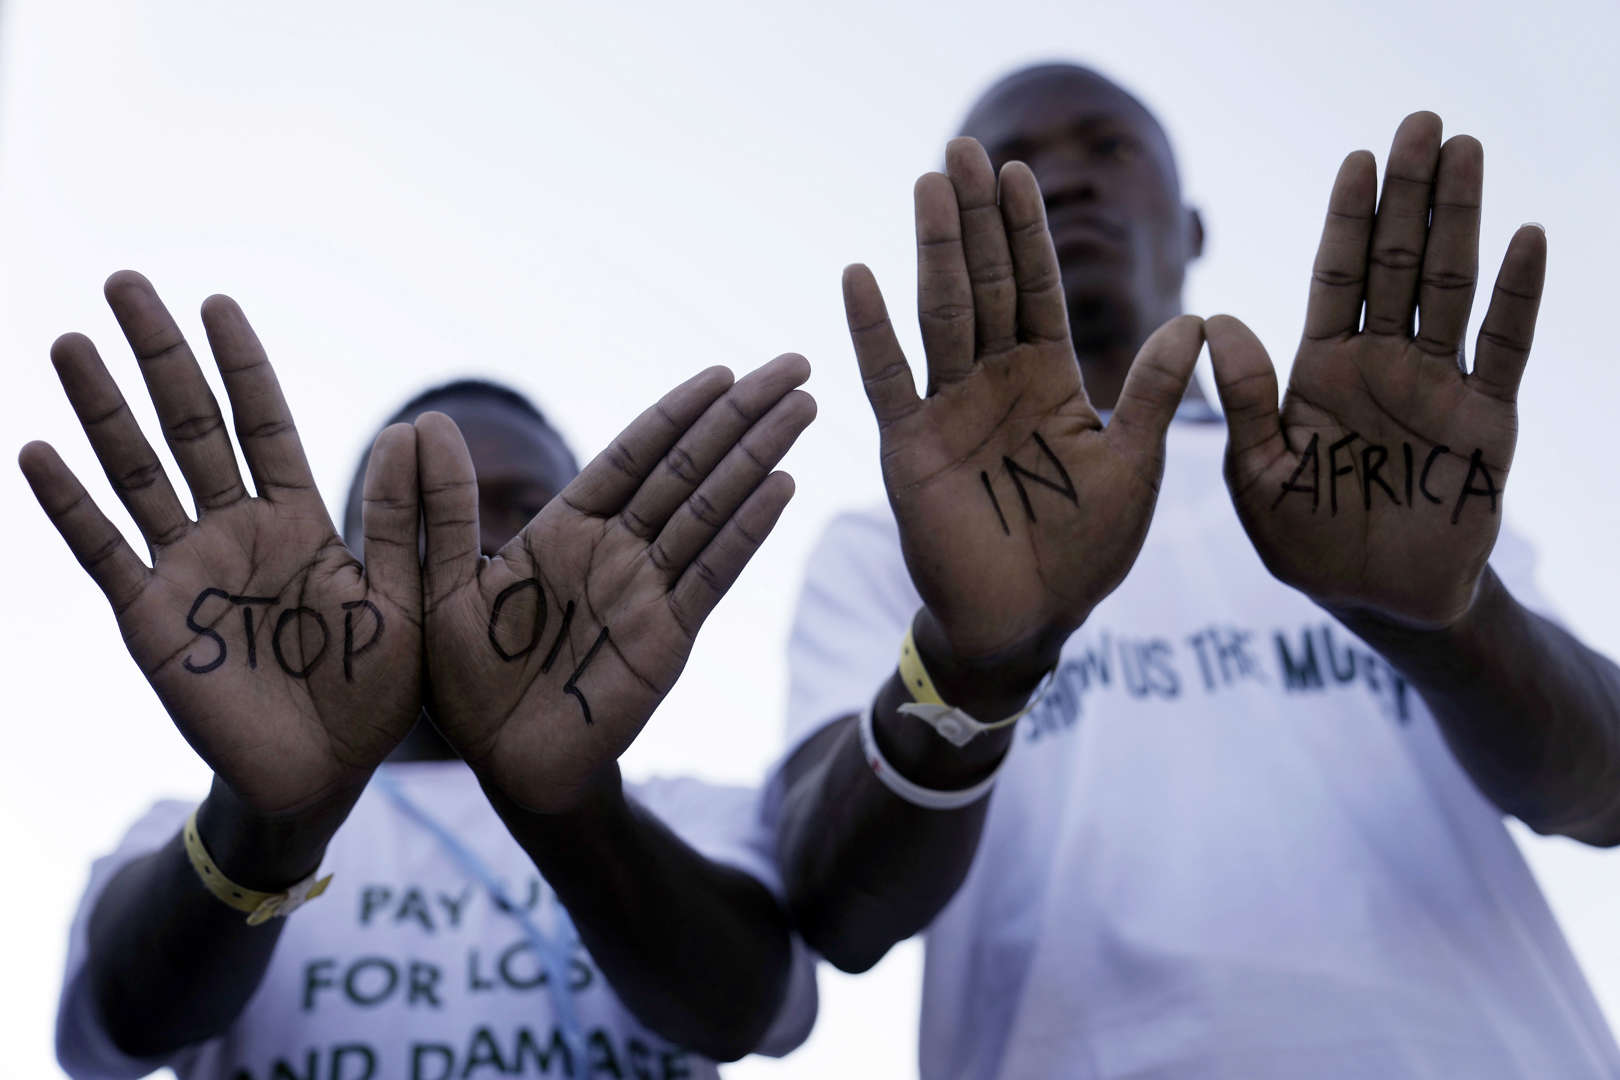 Demonstrators show “stop oil in Africa” written on their hands during a protest with Stop Pipelines coalition against pipelines in East Africa at the COP27 U.N. Climate Summit, Friday, 11 November 2022, in Sharm el-Sheikh, Egypt. Photo: Nariman El-Mofty / AP Photo